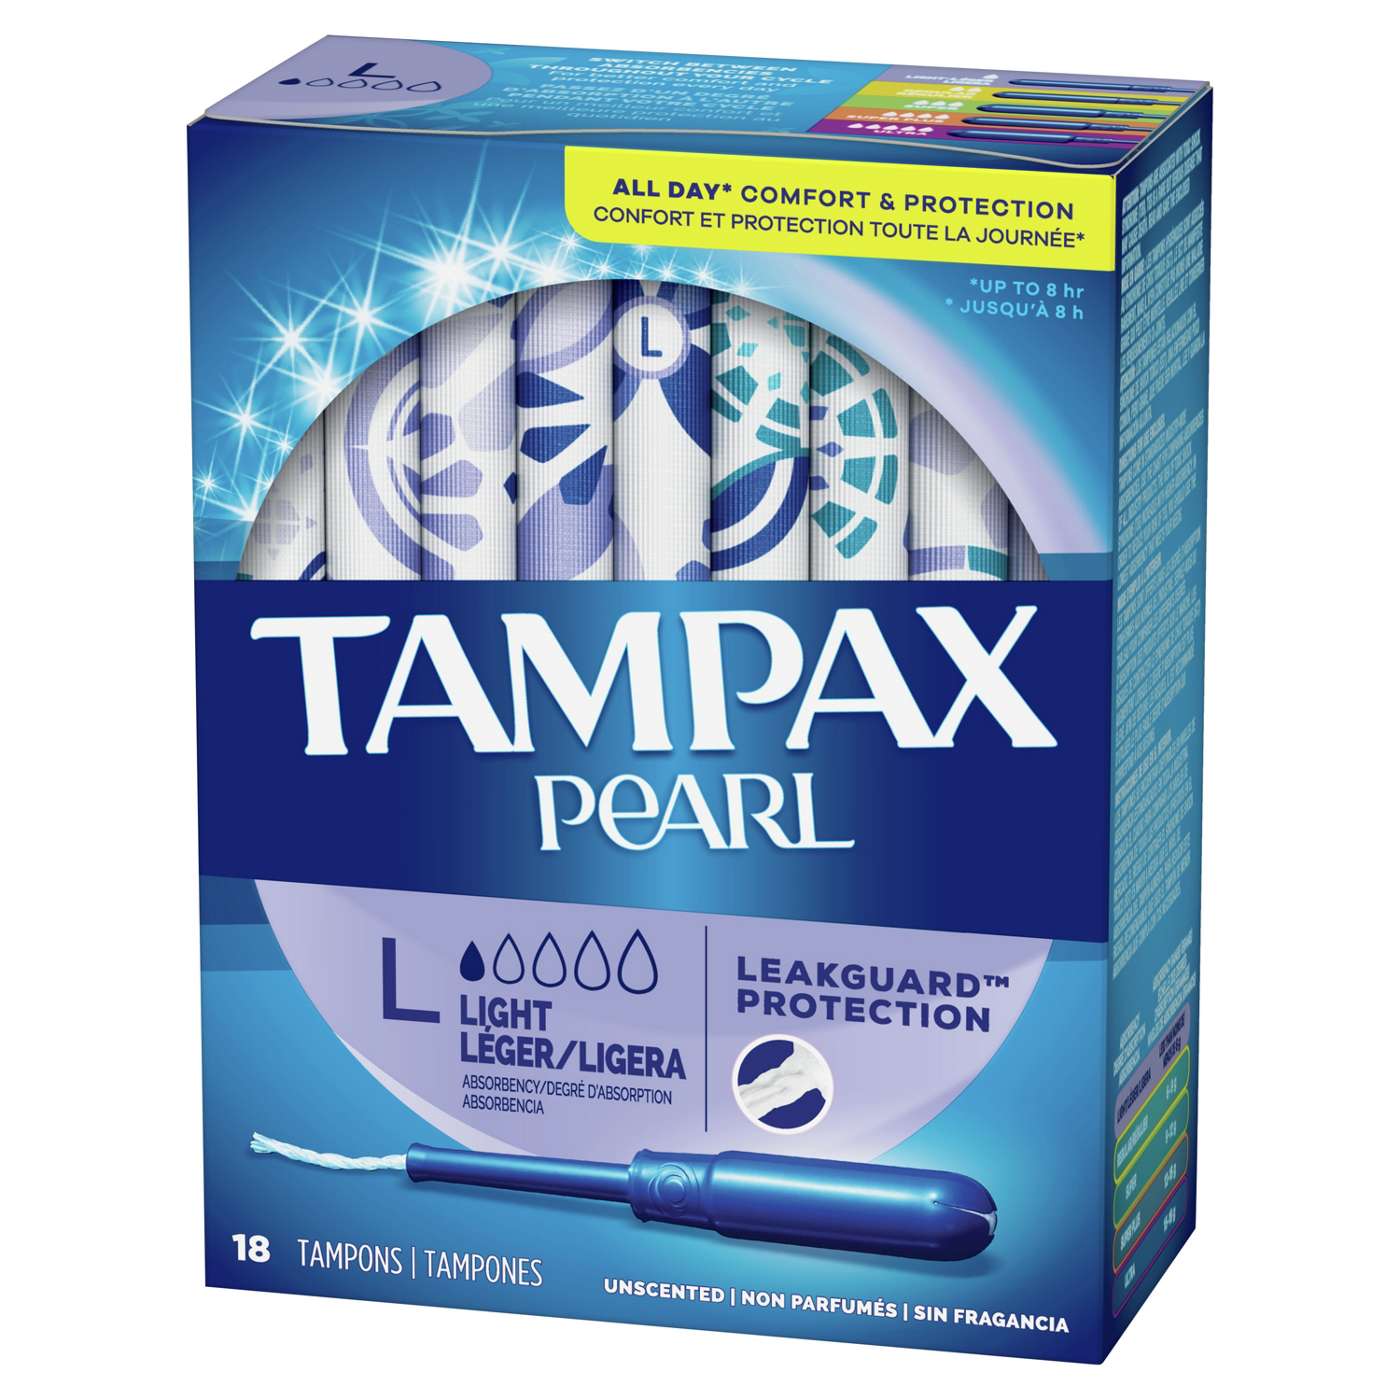 Tampax Pearl Tampons Light Unscented; image 4 of 5